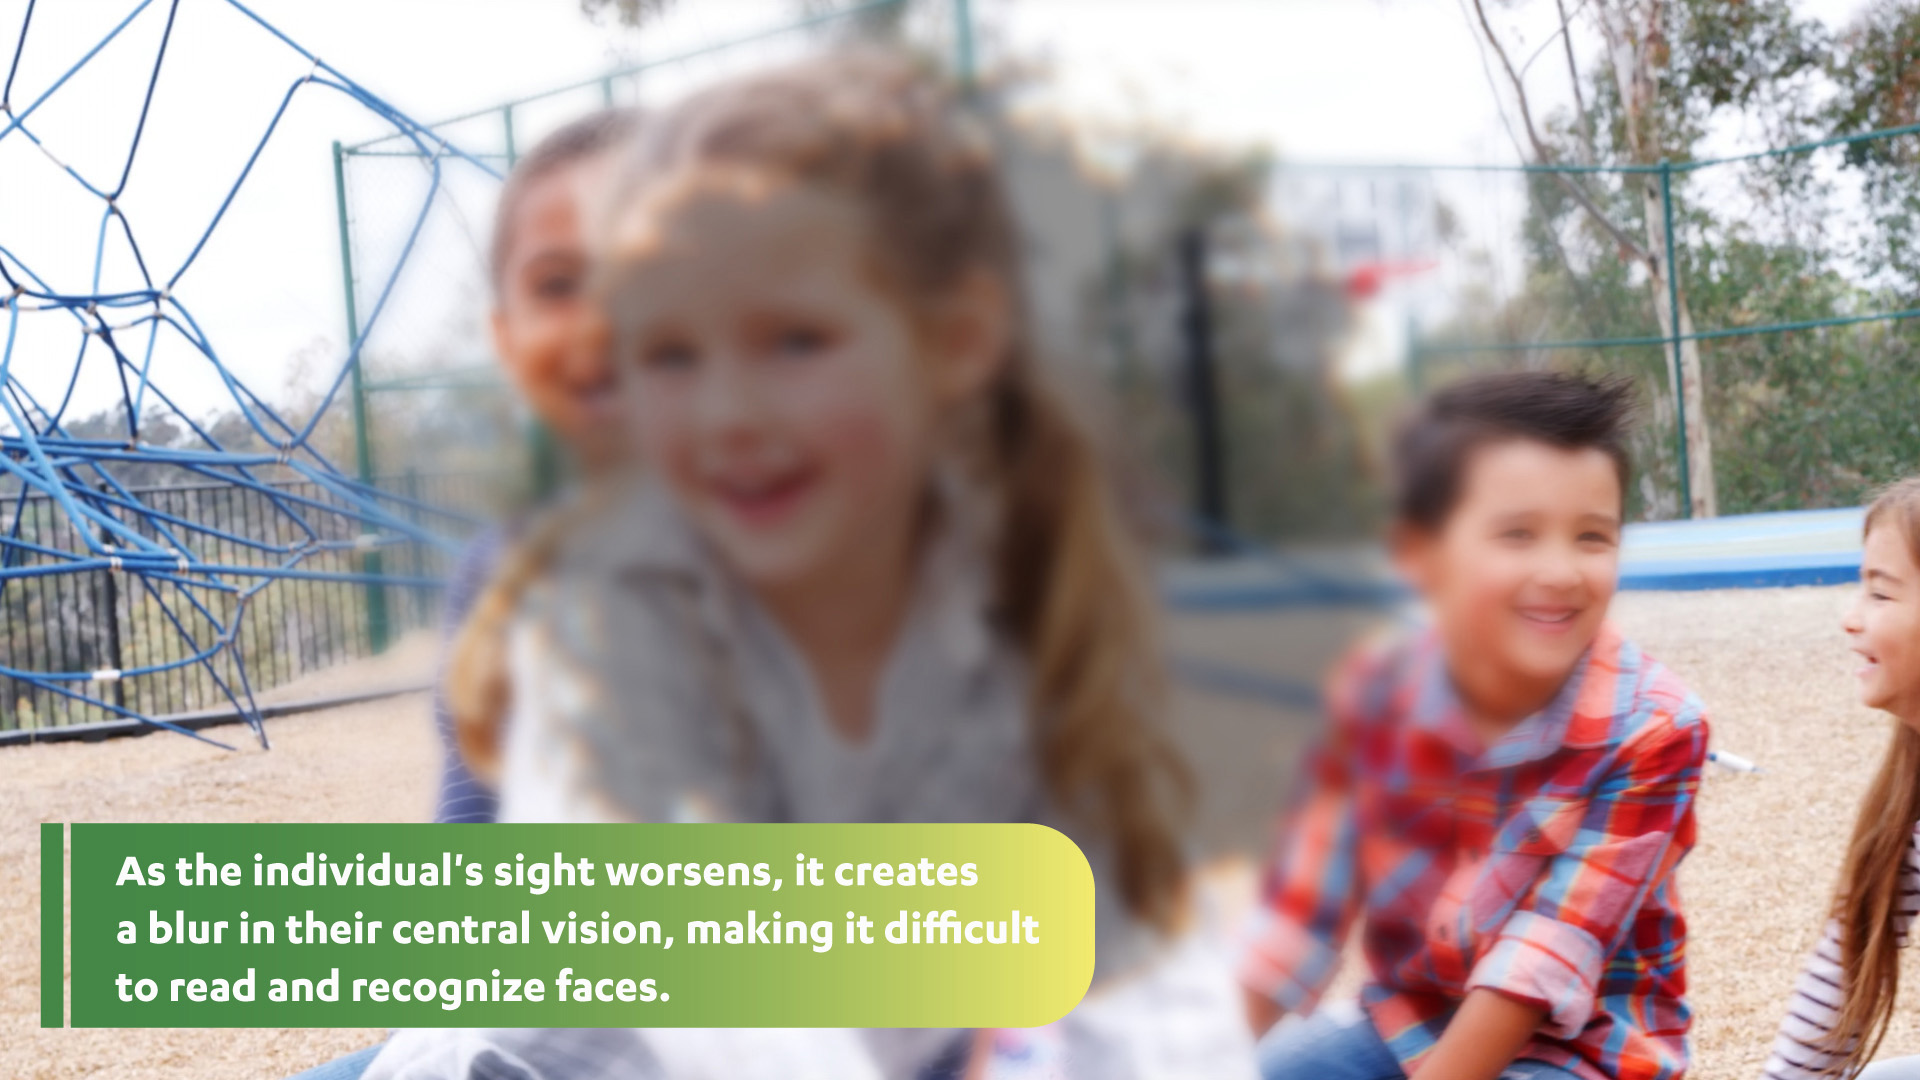 As the individual’s sight worsens, it creates a blur in their central vision, making it difficult to read and recognize faces